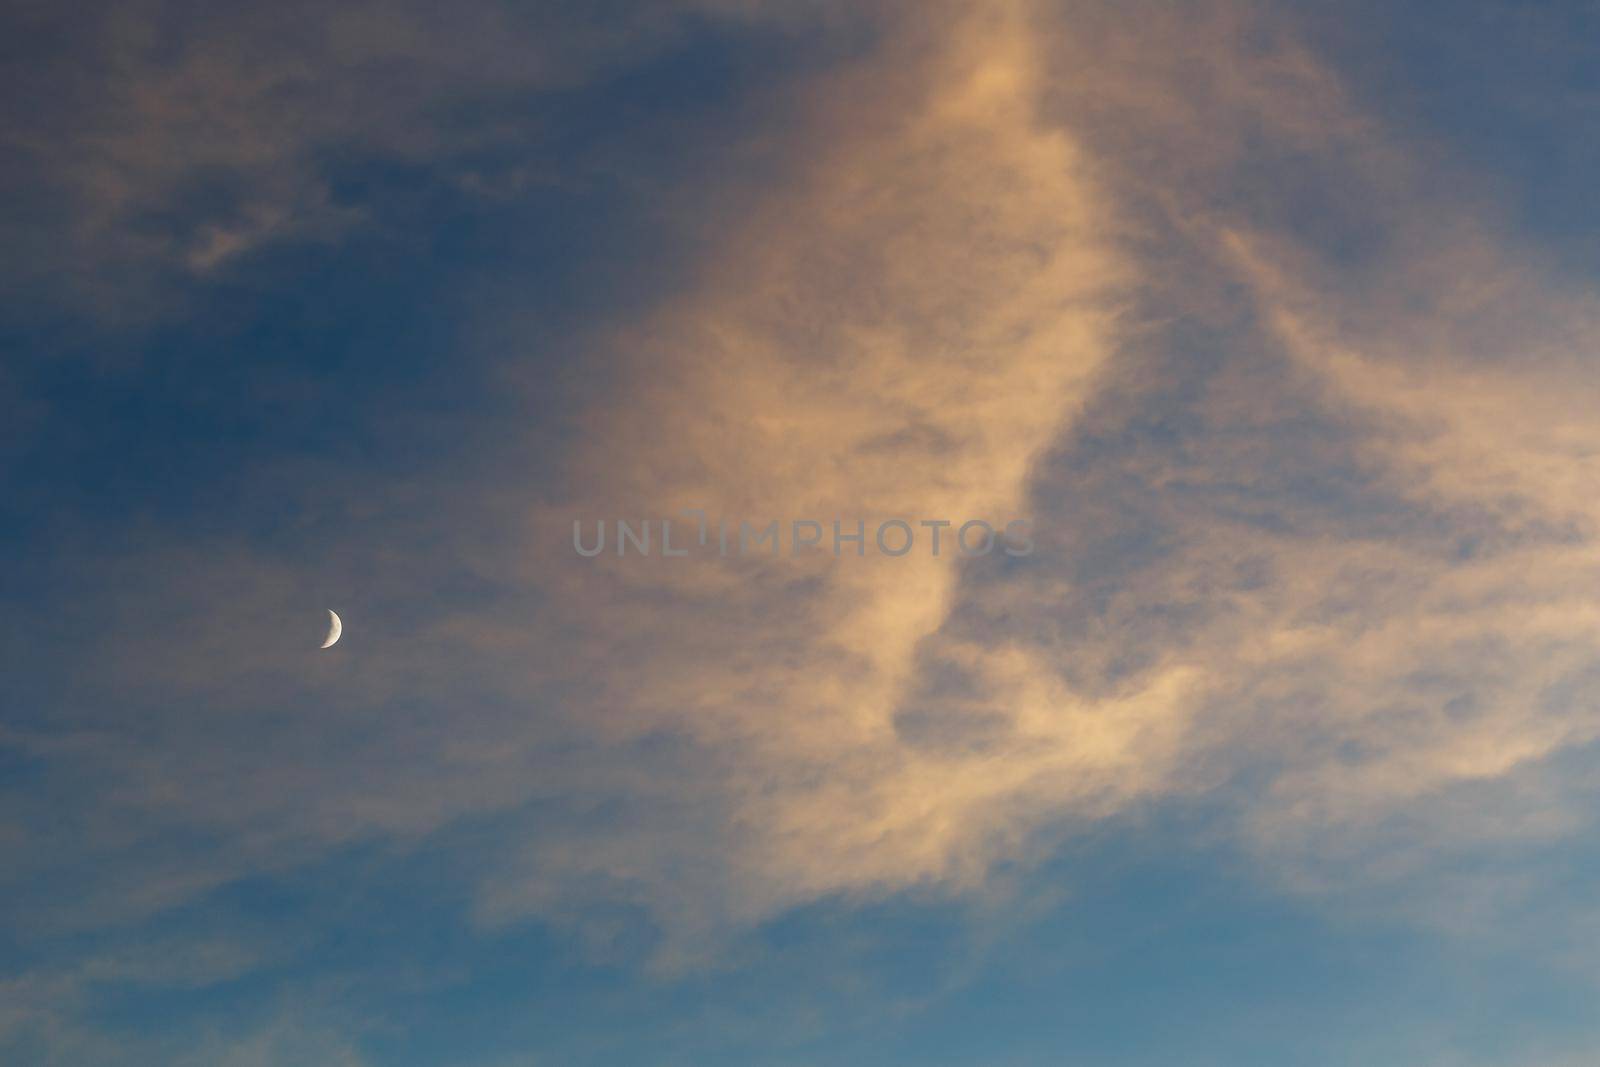 A growing moon in the blue sky among the clouds illuminated by the sun at sunset by AlexGrec